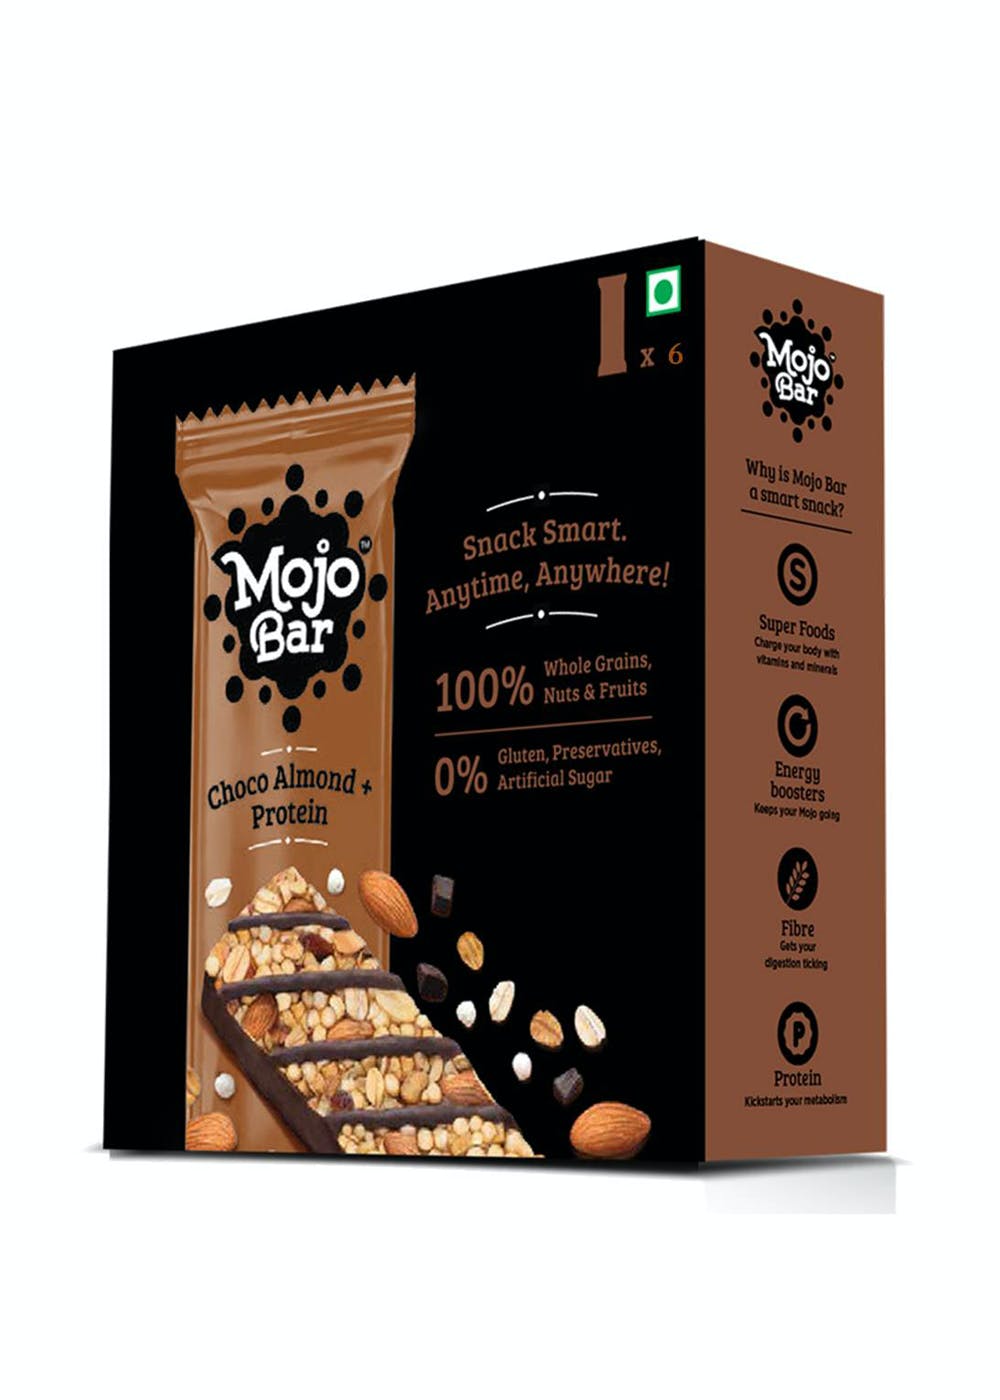 Choco Almond + Protein Snack Bar - Pack of 6